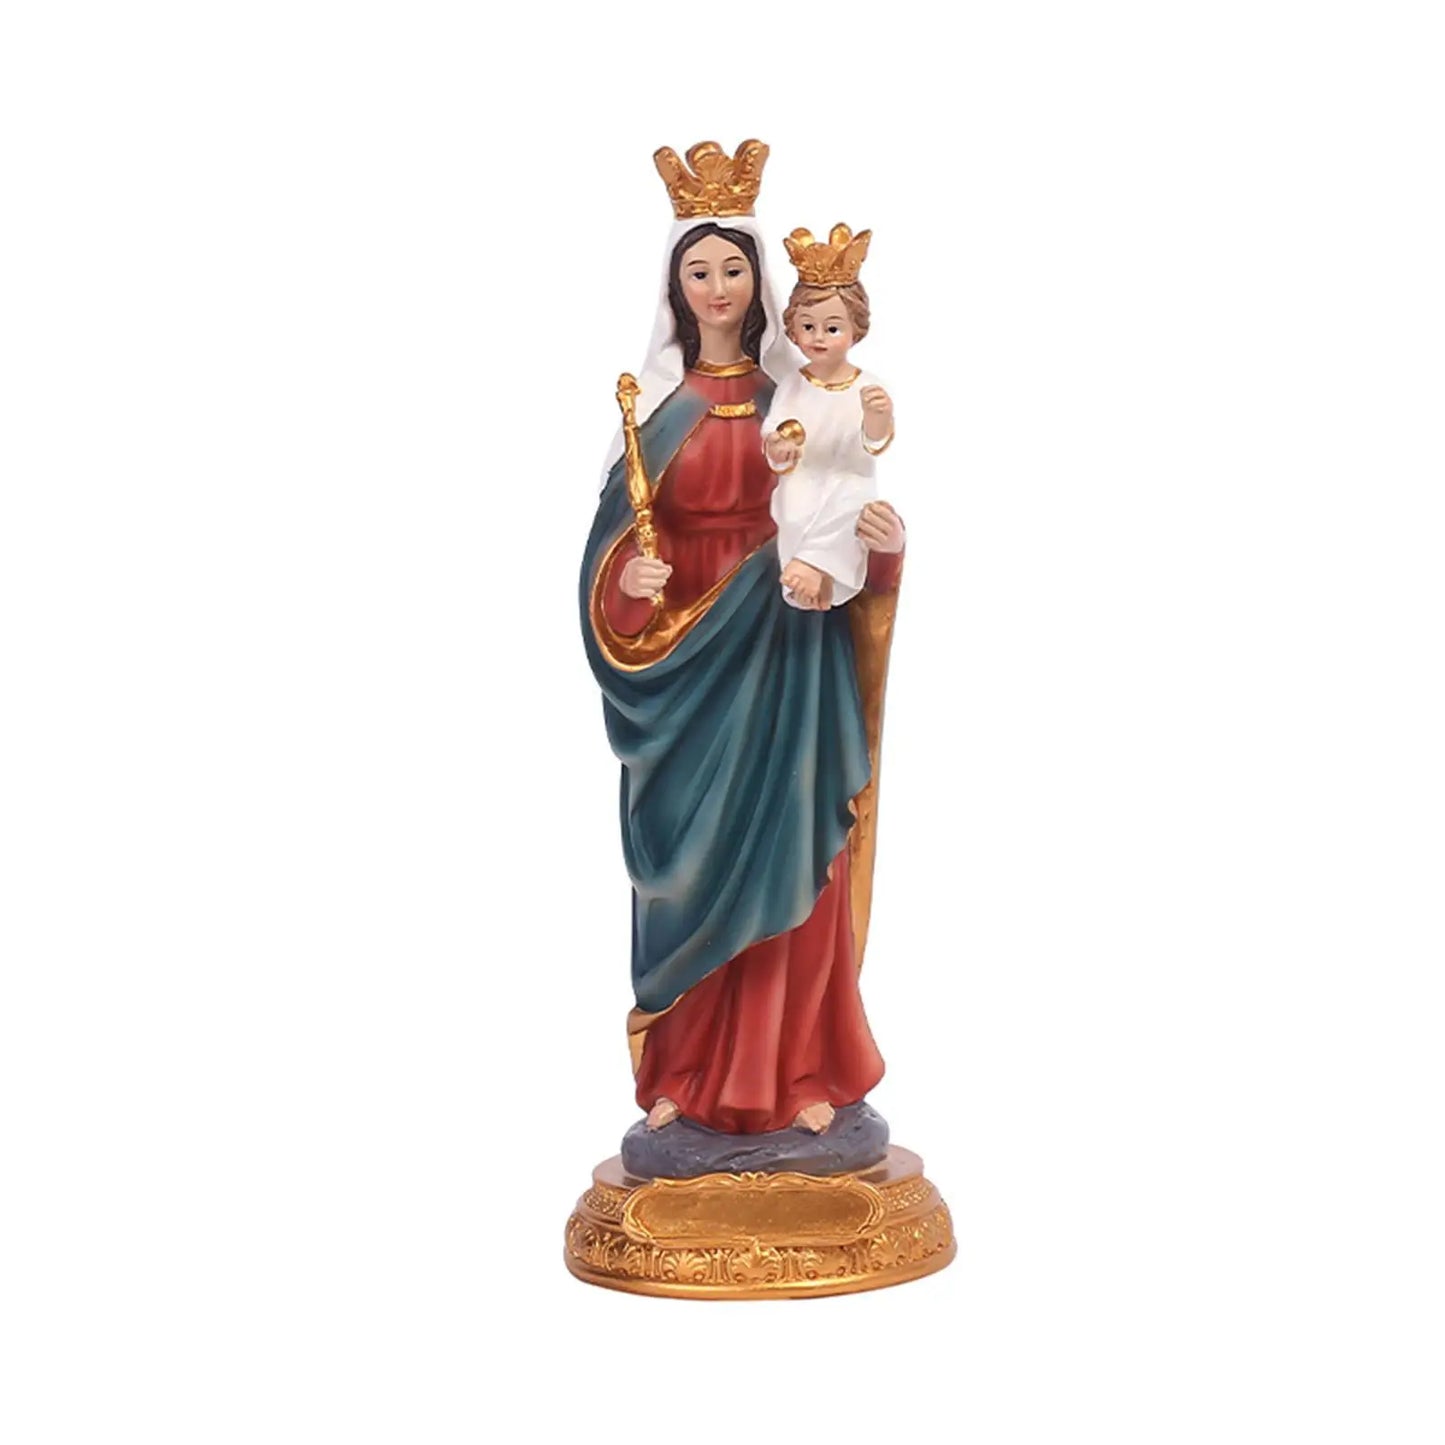 Resin Figurines Jesus Sculpture Wedding Christian Virgin Mother Mary Statue Classical Figures Holding Children Ornaments